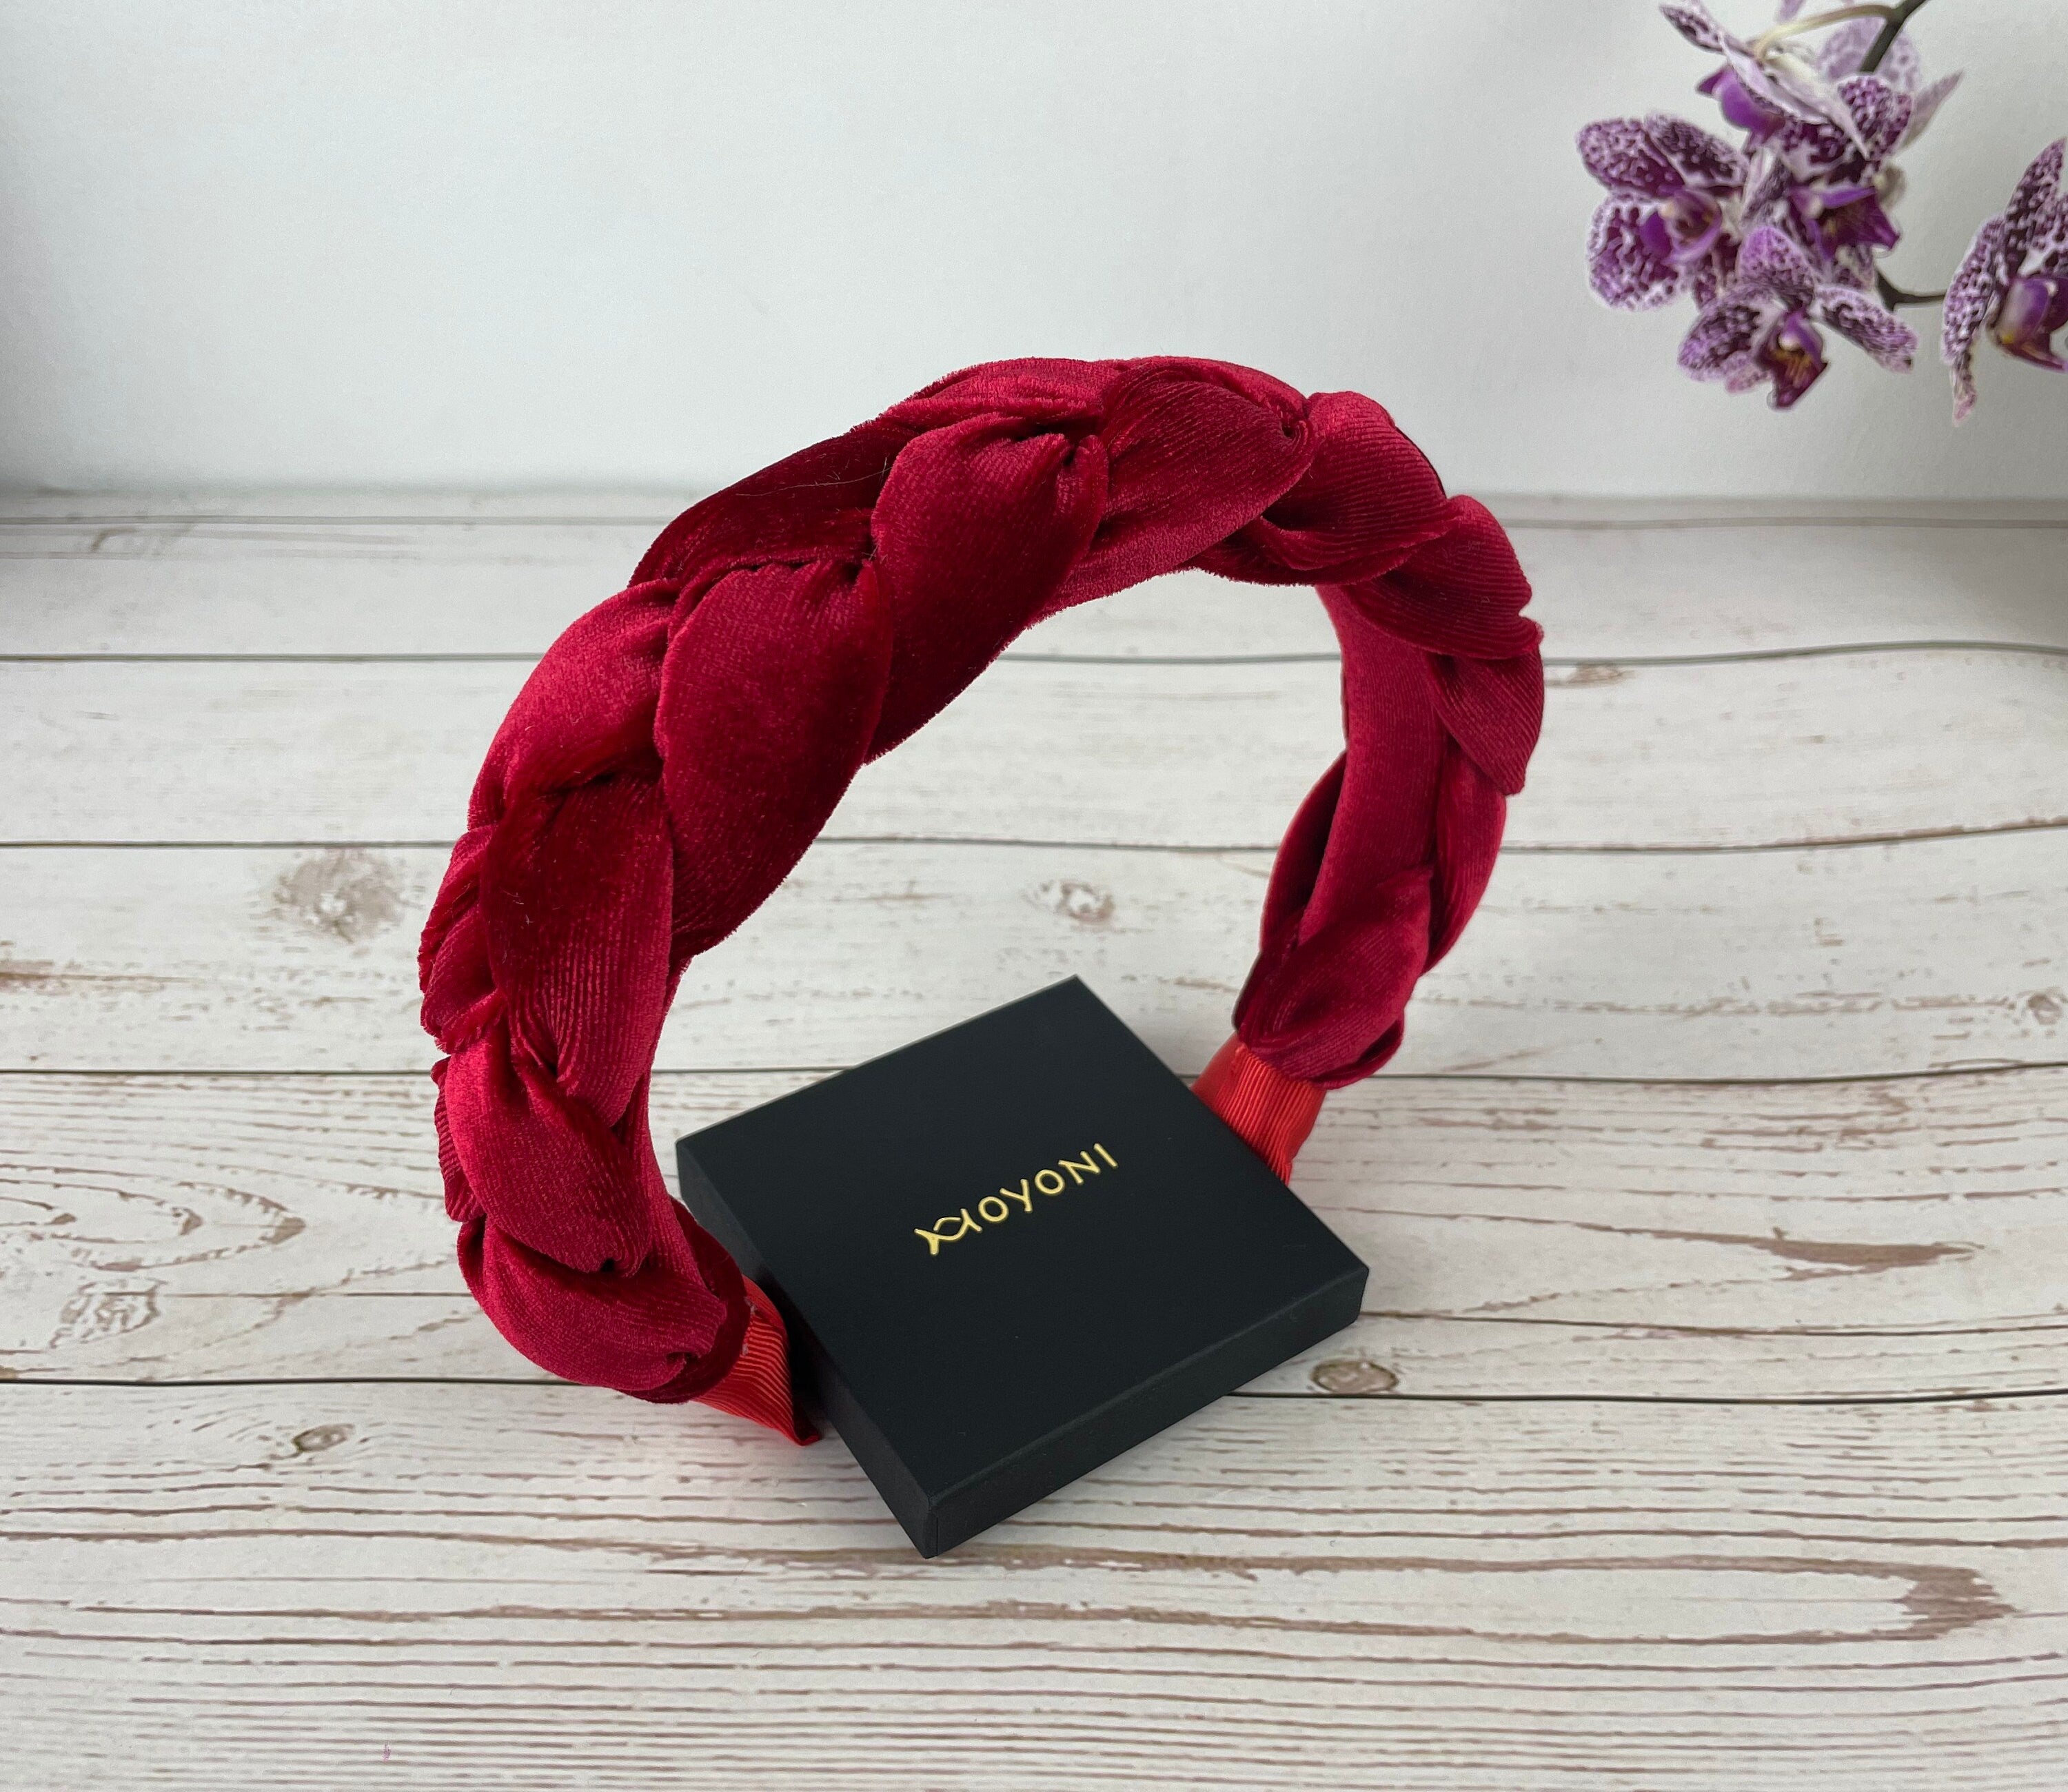 Make a statement with our Red Velvet Braided Headband! With its stylish padded design and trendy braided look, this accessory is sure to turn heads. Perfect for gifting to the fashionista in your life. Shop now on Etsy.